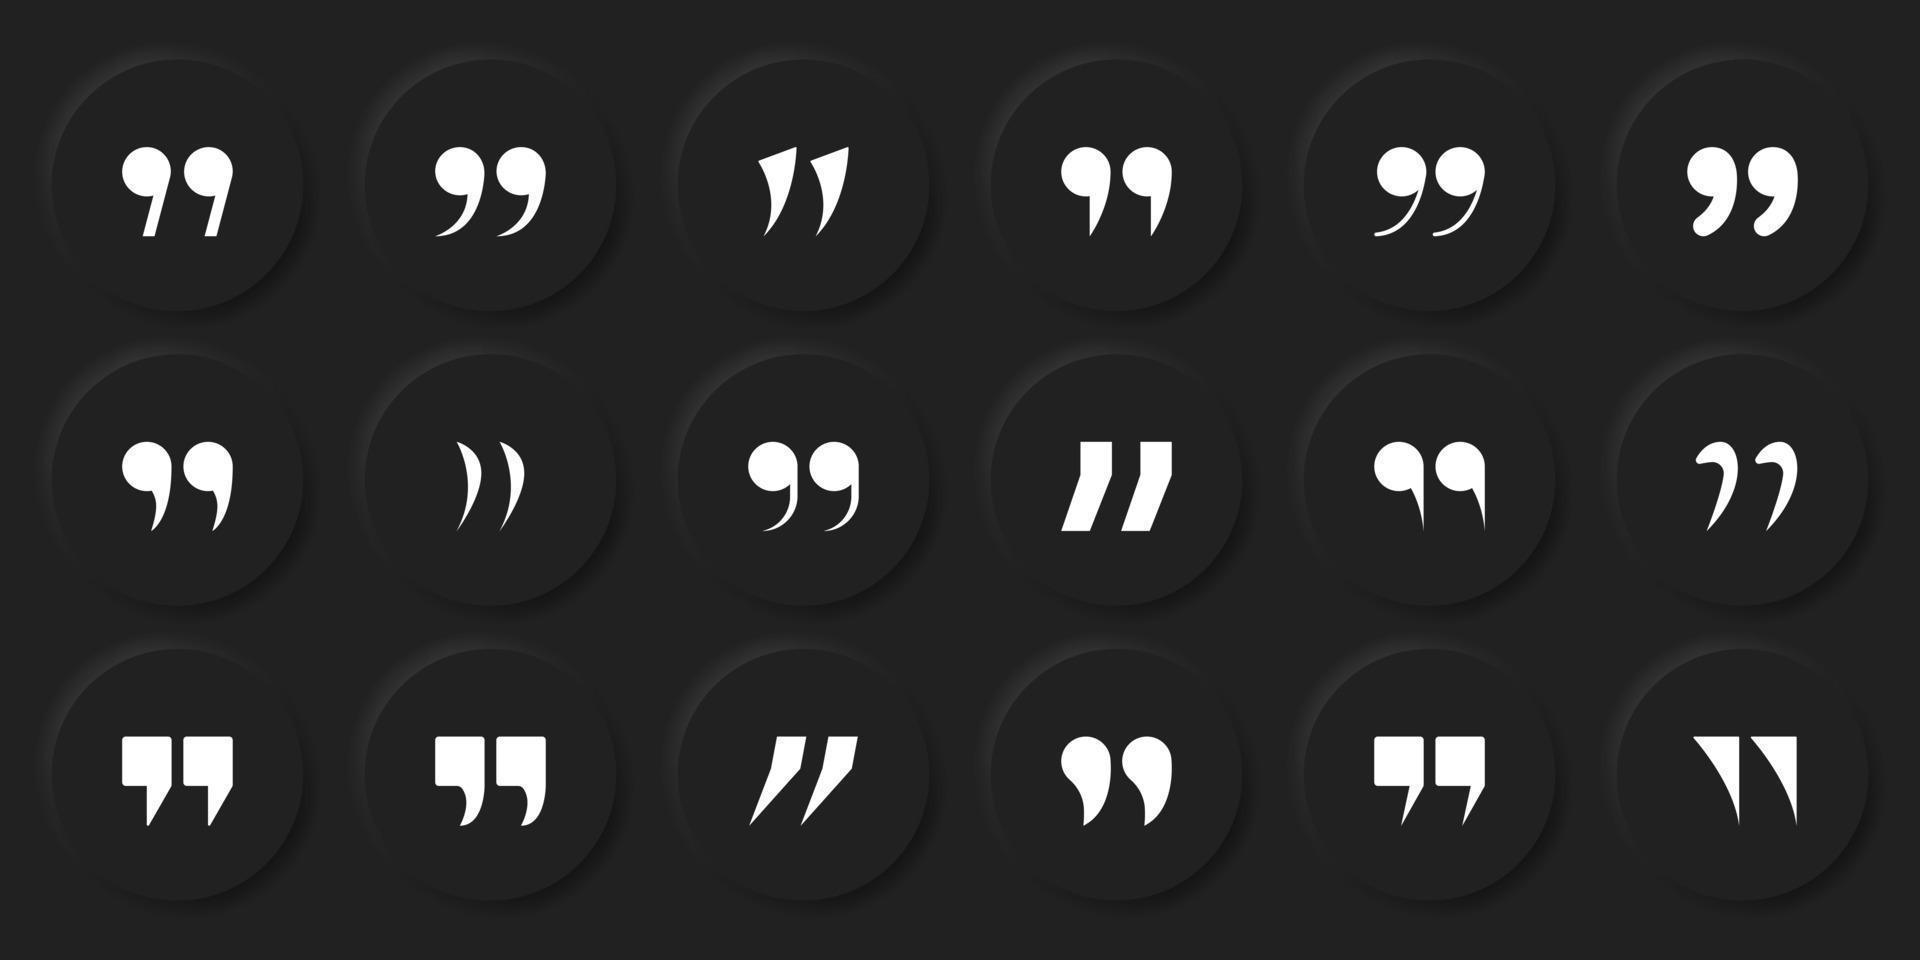 Set of Quotation Mark Icon. Double Comma Silhouette Signs of Quote Icons. White Quotation Signs on Black Background. Punctuation Symbol of Speech. Isolated Vector Illustration.